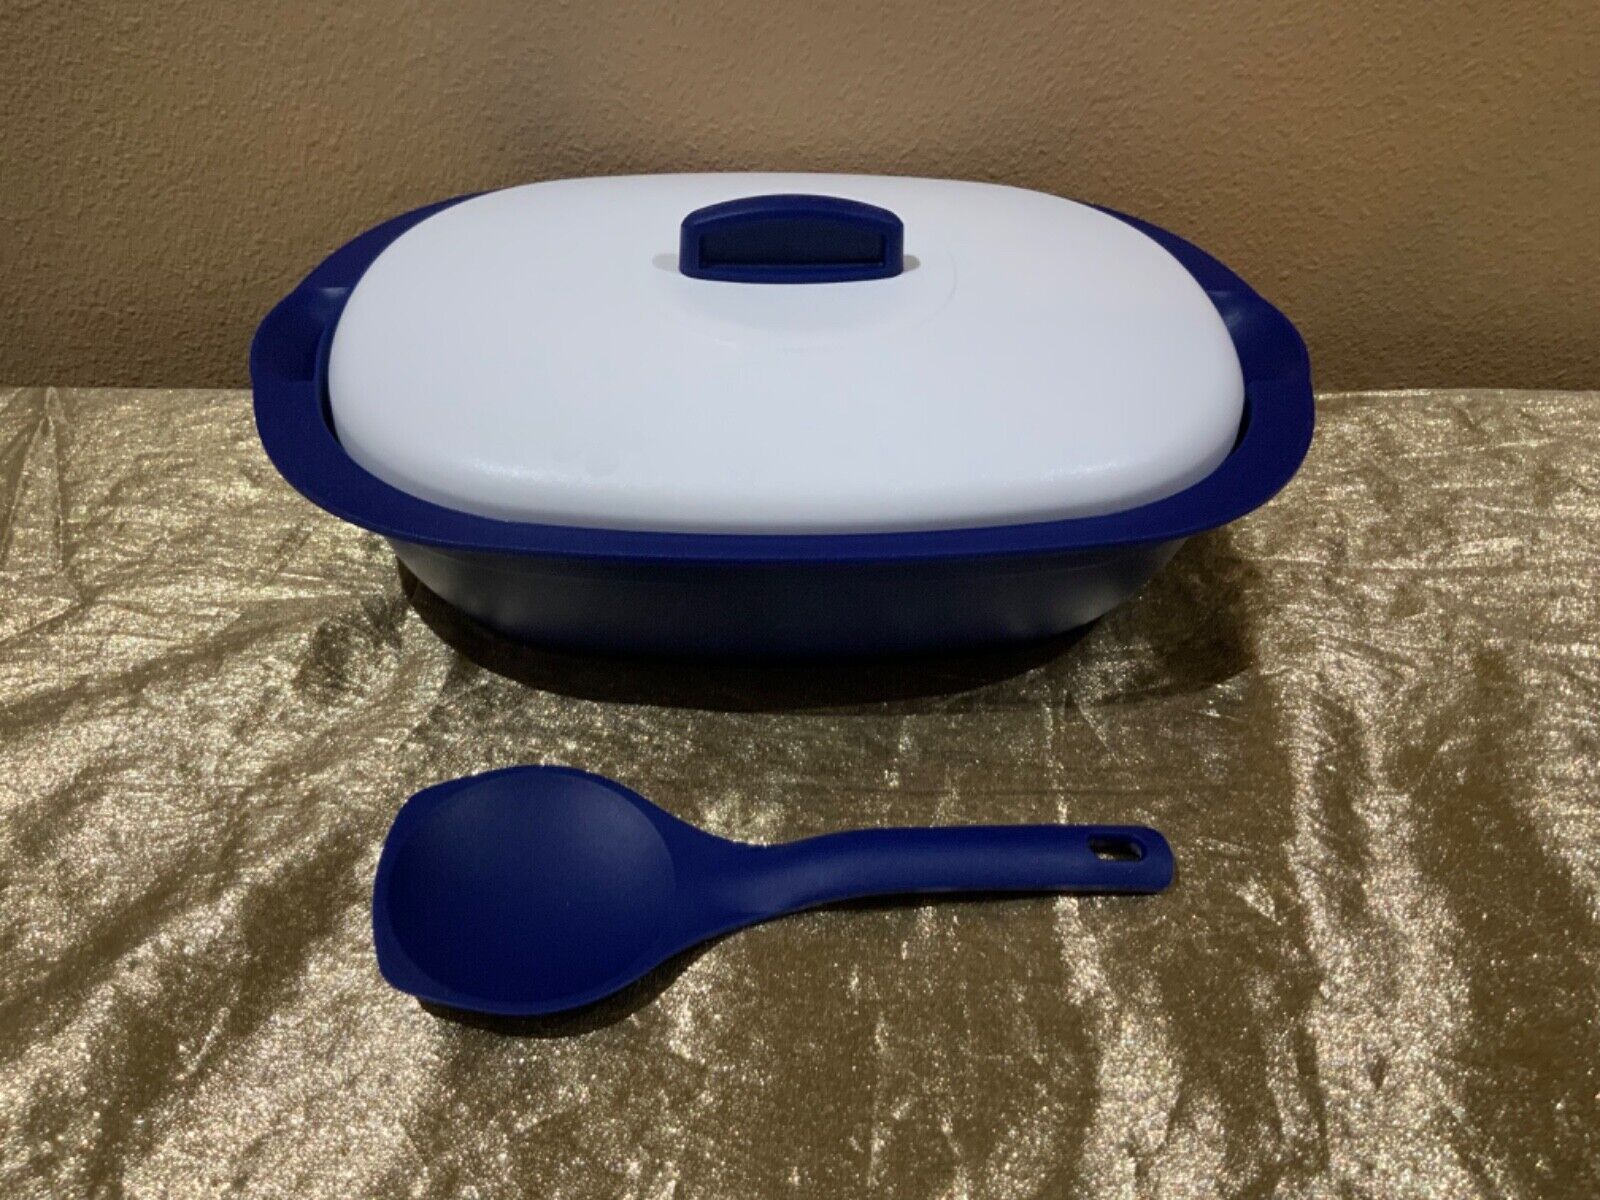 New UNIQUE Tupperware Legacy Rice and Soup Server Bowl with Scoop 1.7L in Blue